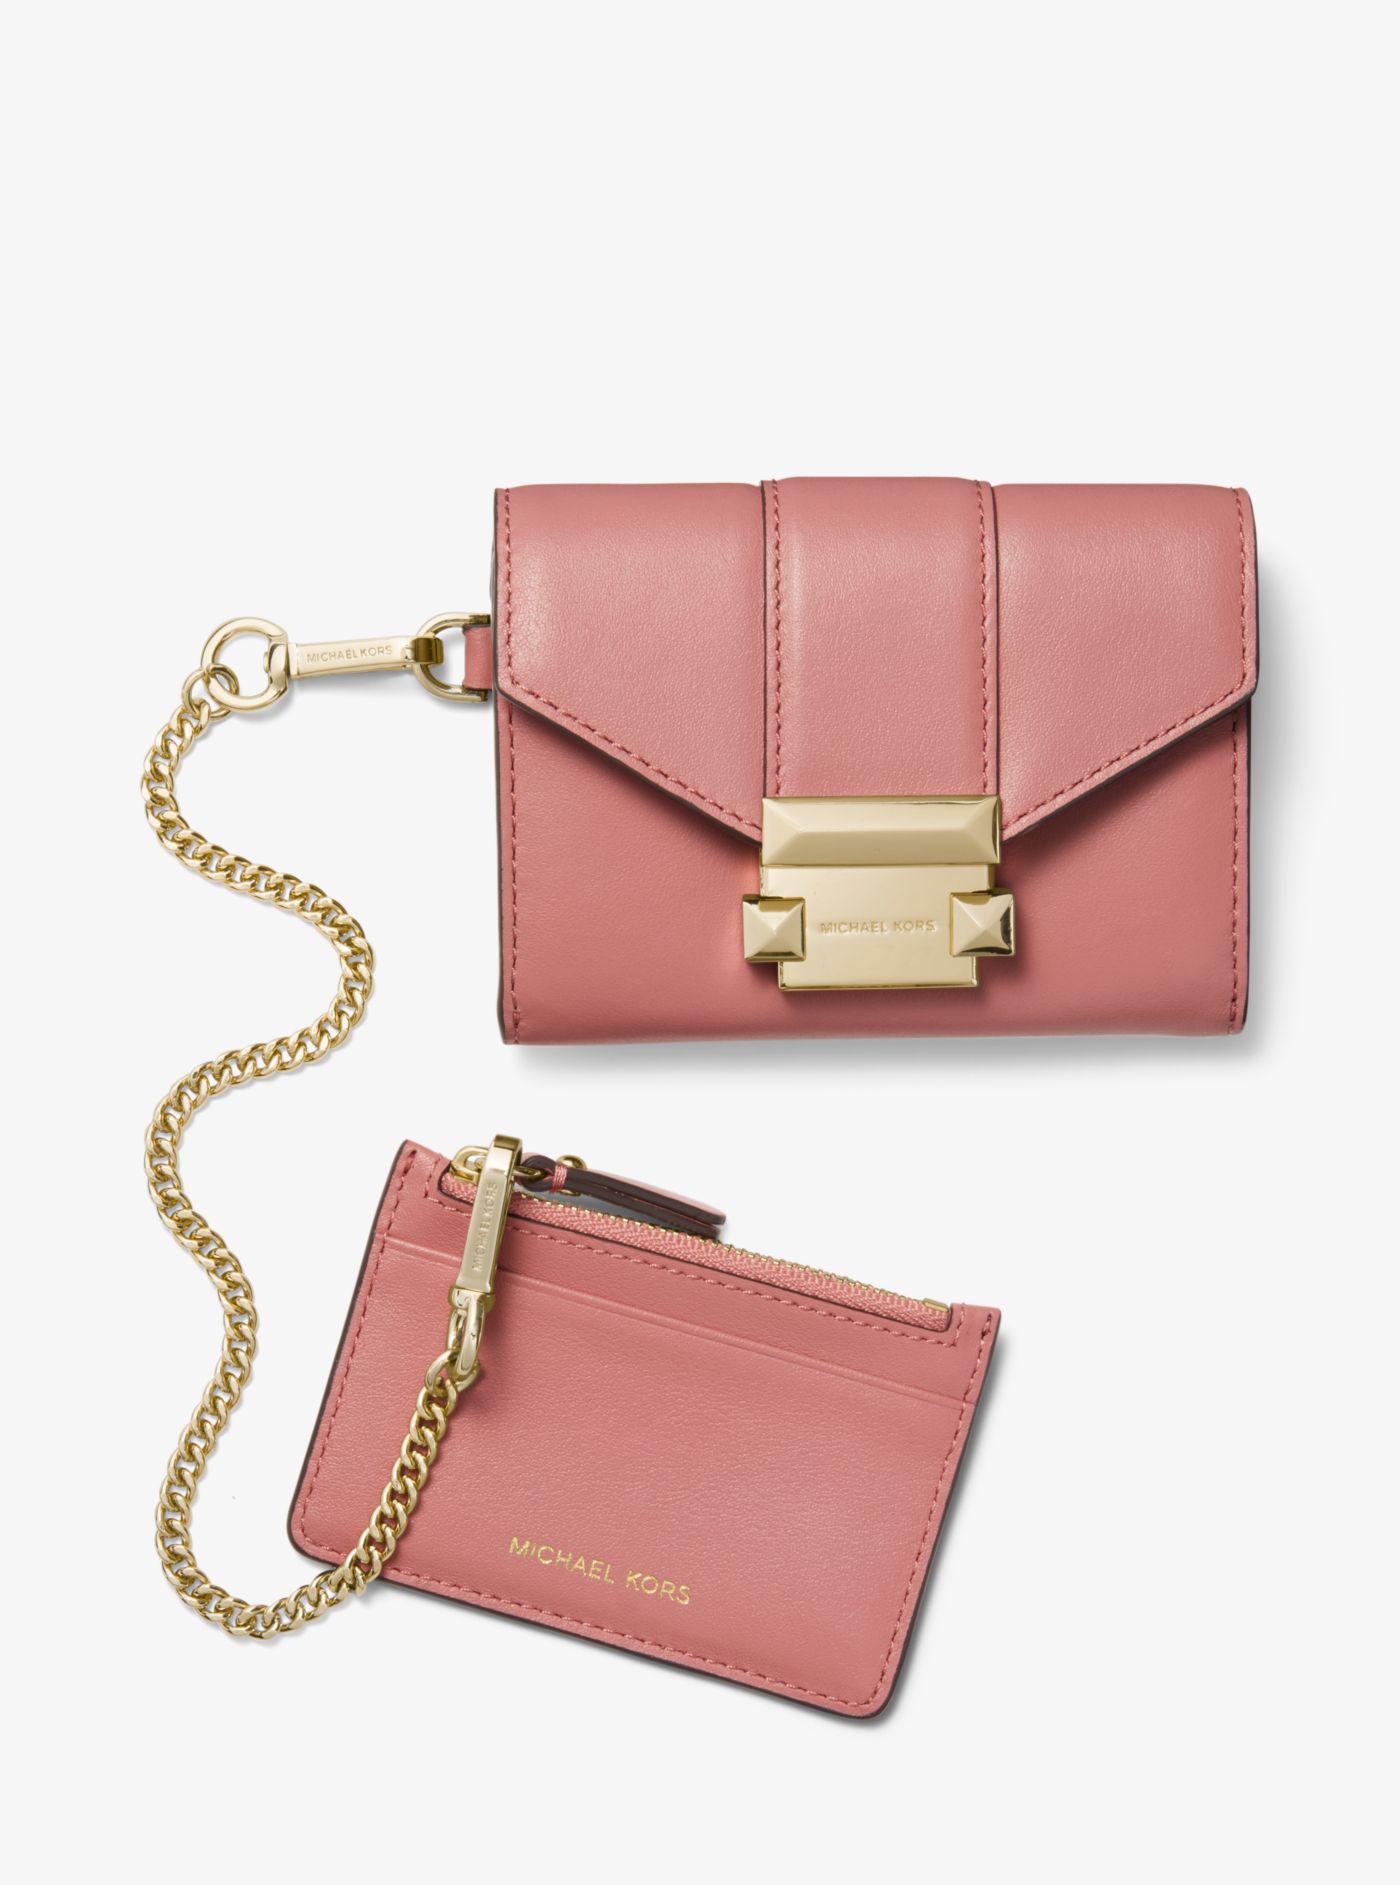 Michael Kors Whitney Small Leather Chain Wallet in Rose (Pink) - Lyst